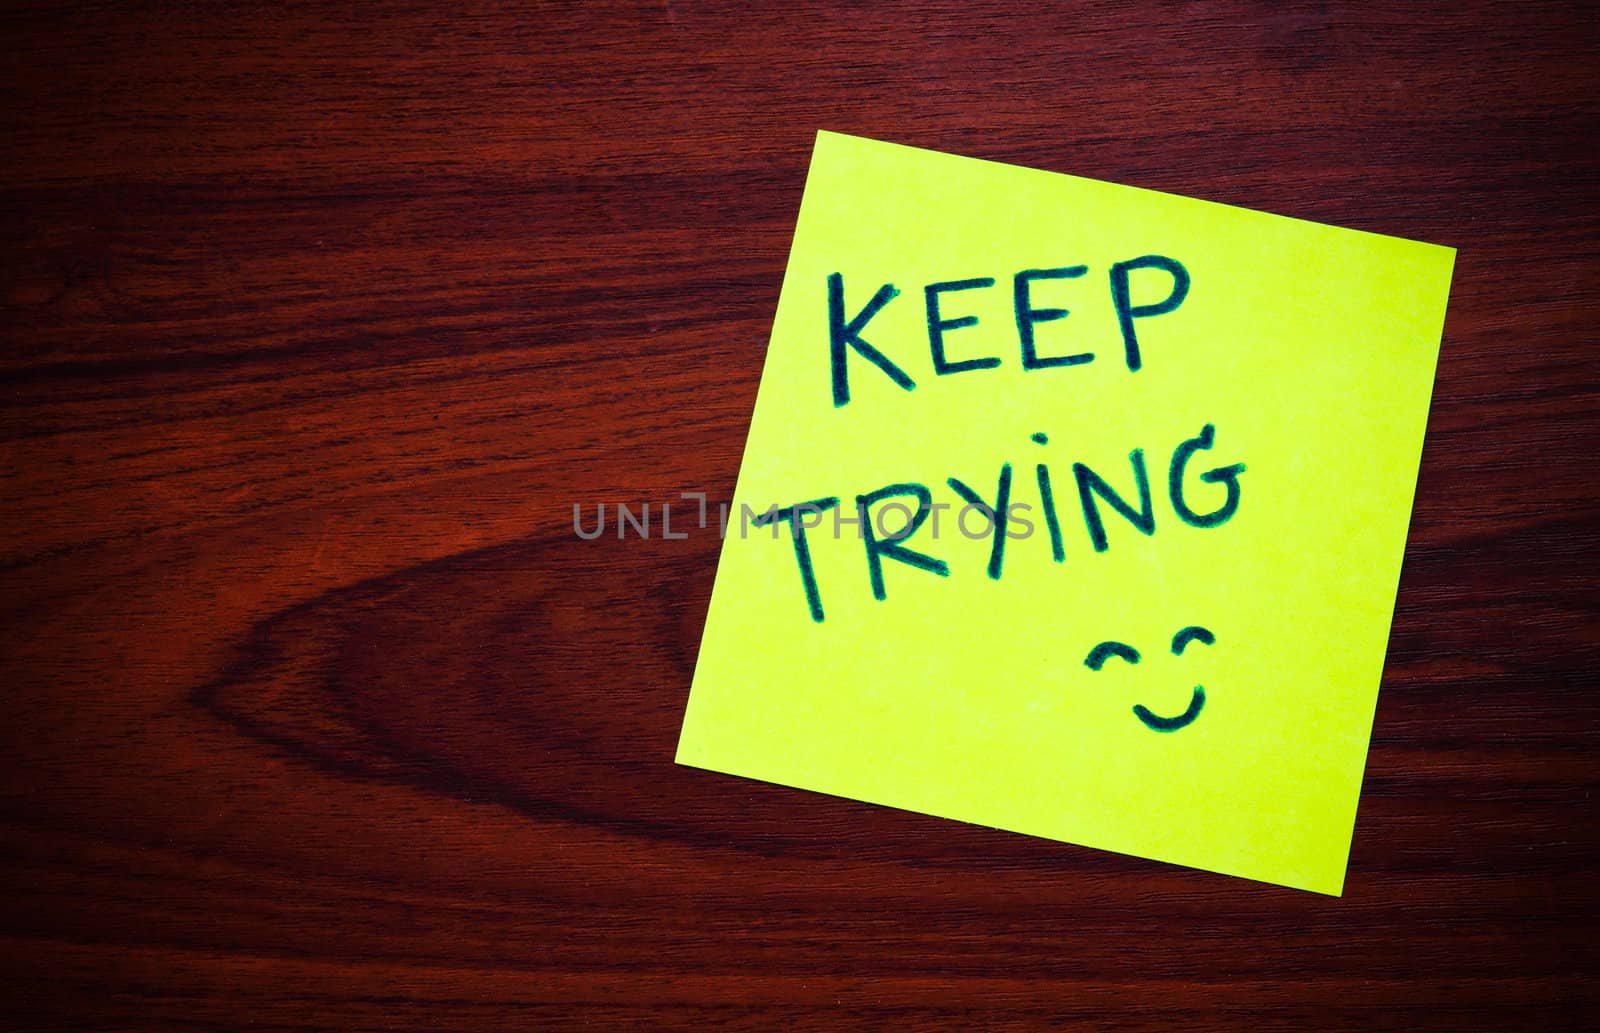 Keep trying on yellow sticky note against wood wall